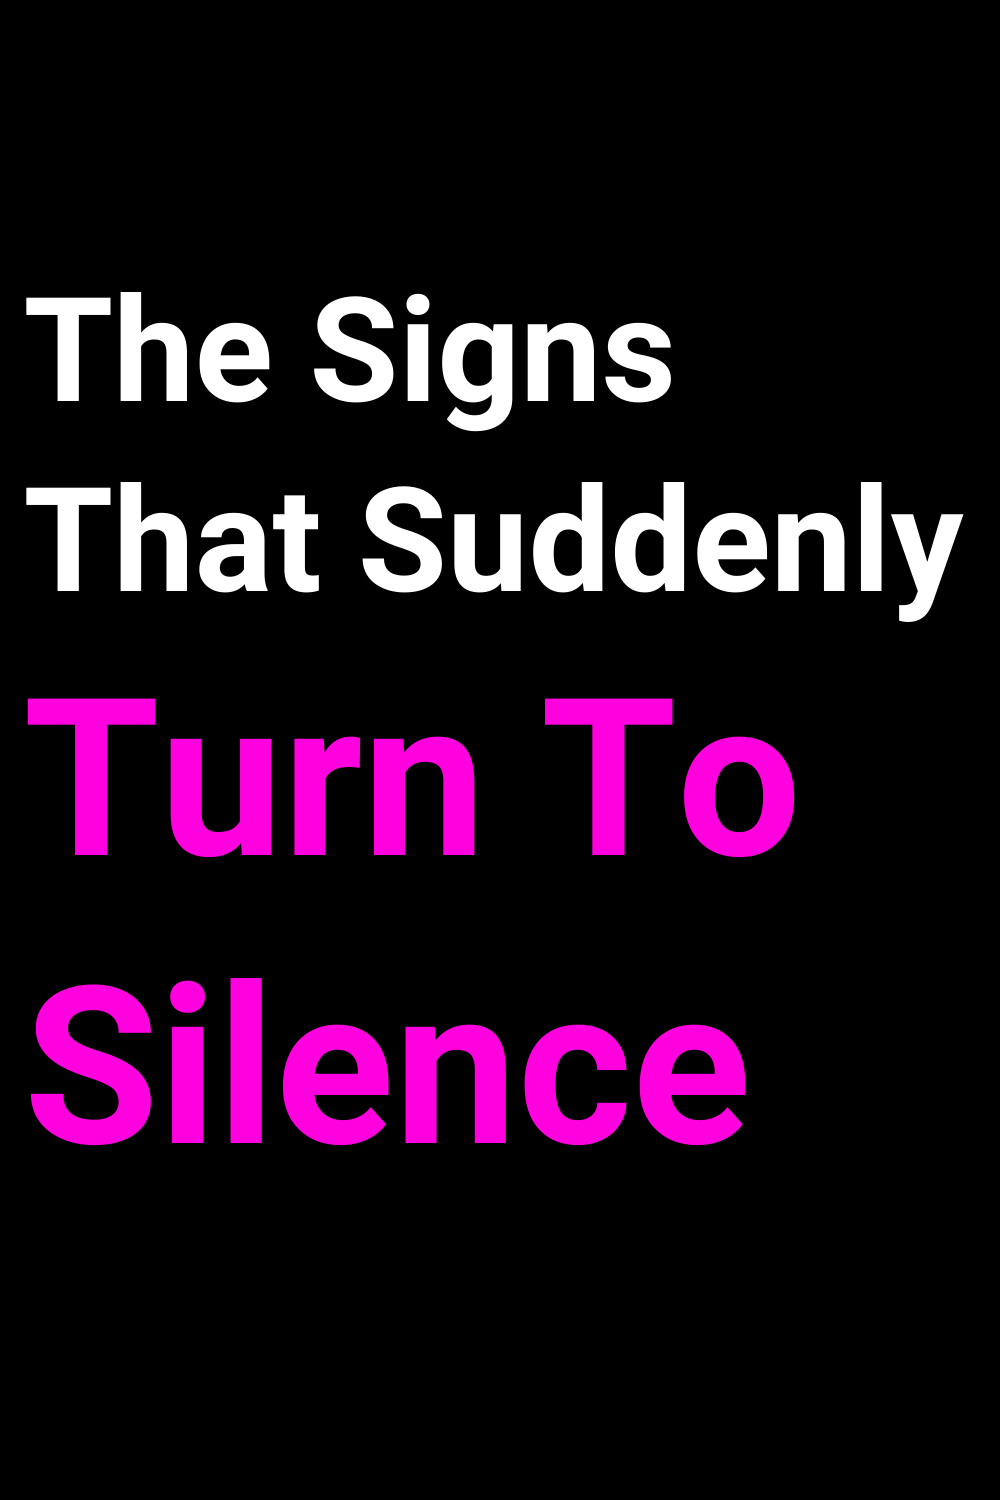 The Signs That Suddenly Turn To Silence